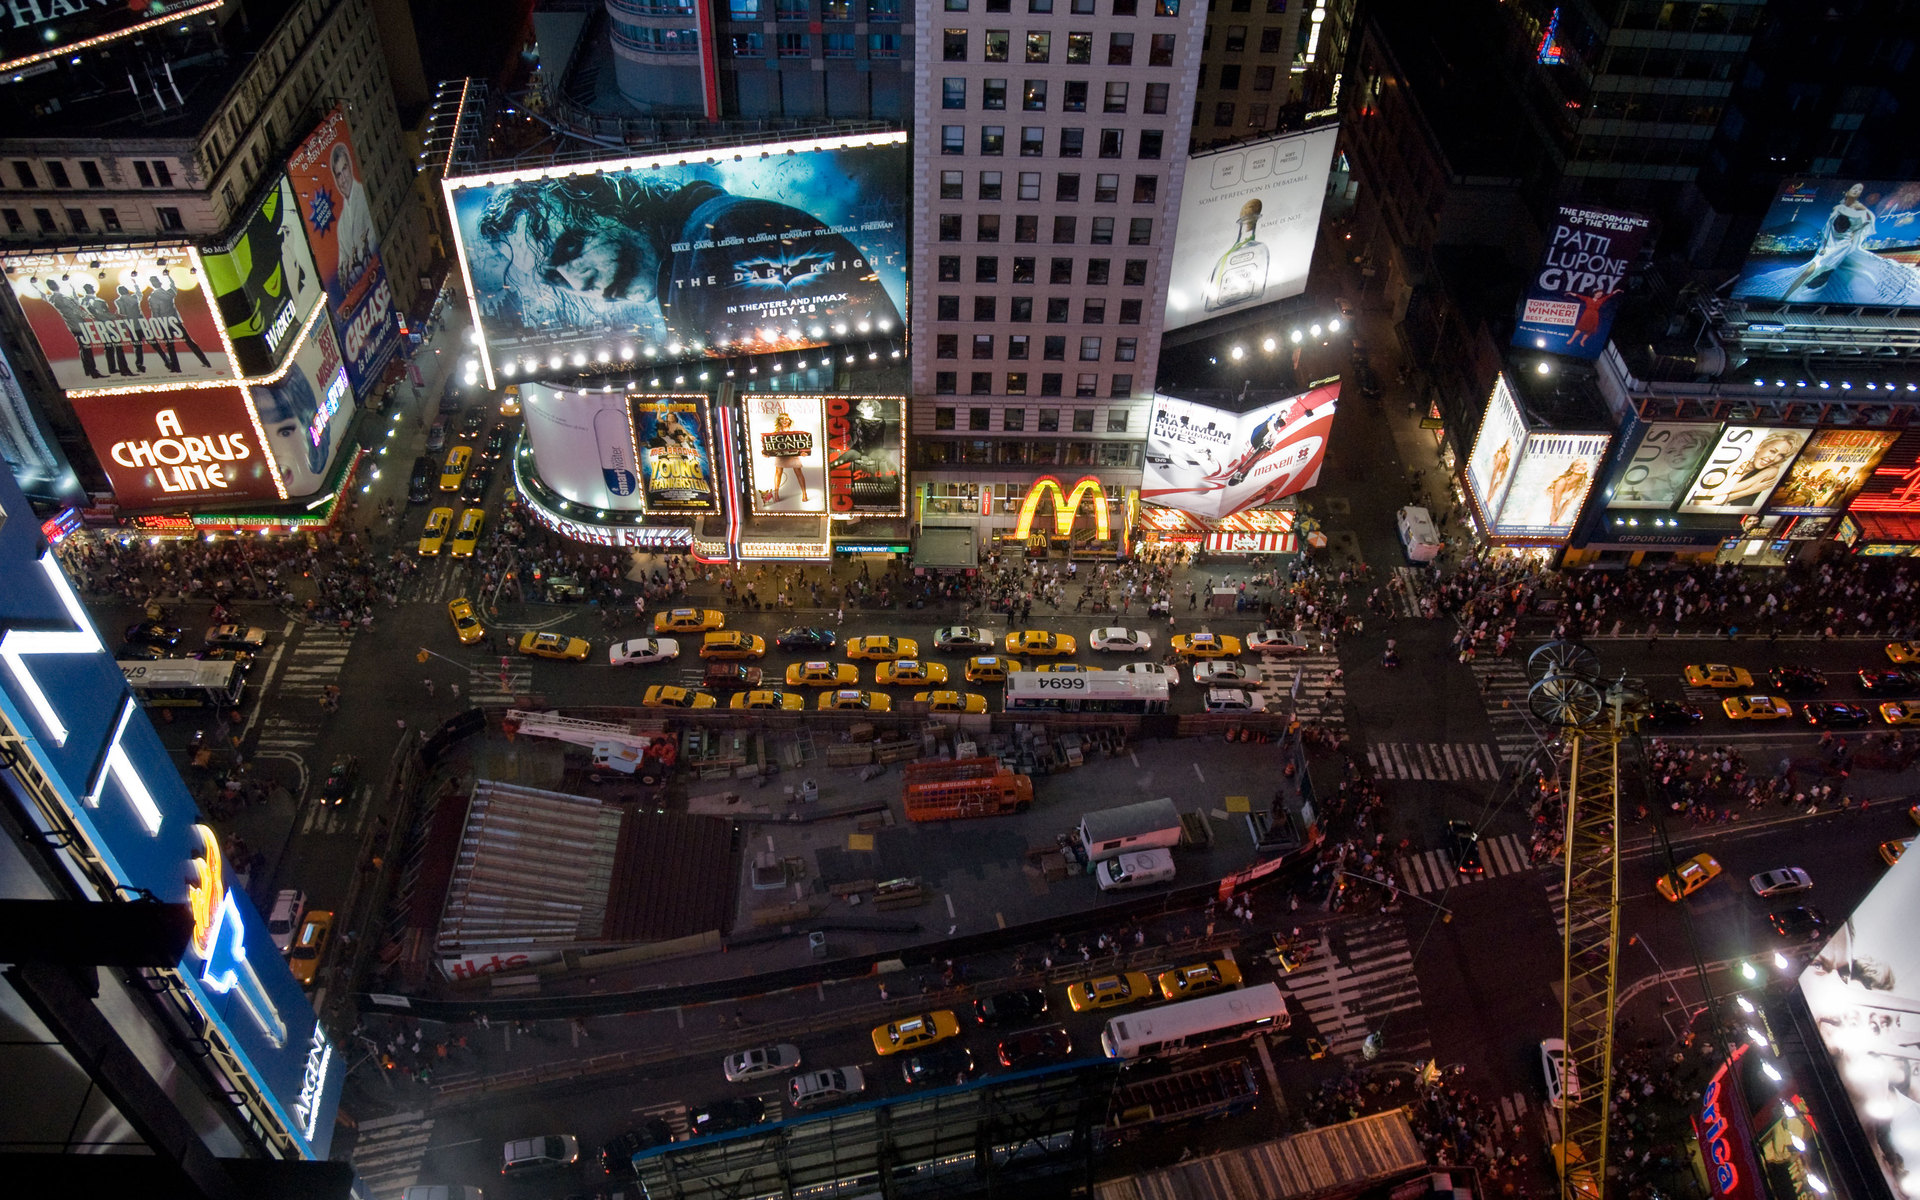 man made, times square, architecture, building, crowd, light, manhattan, new york, night, people, place, road